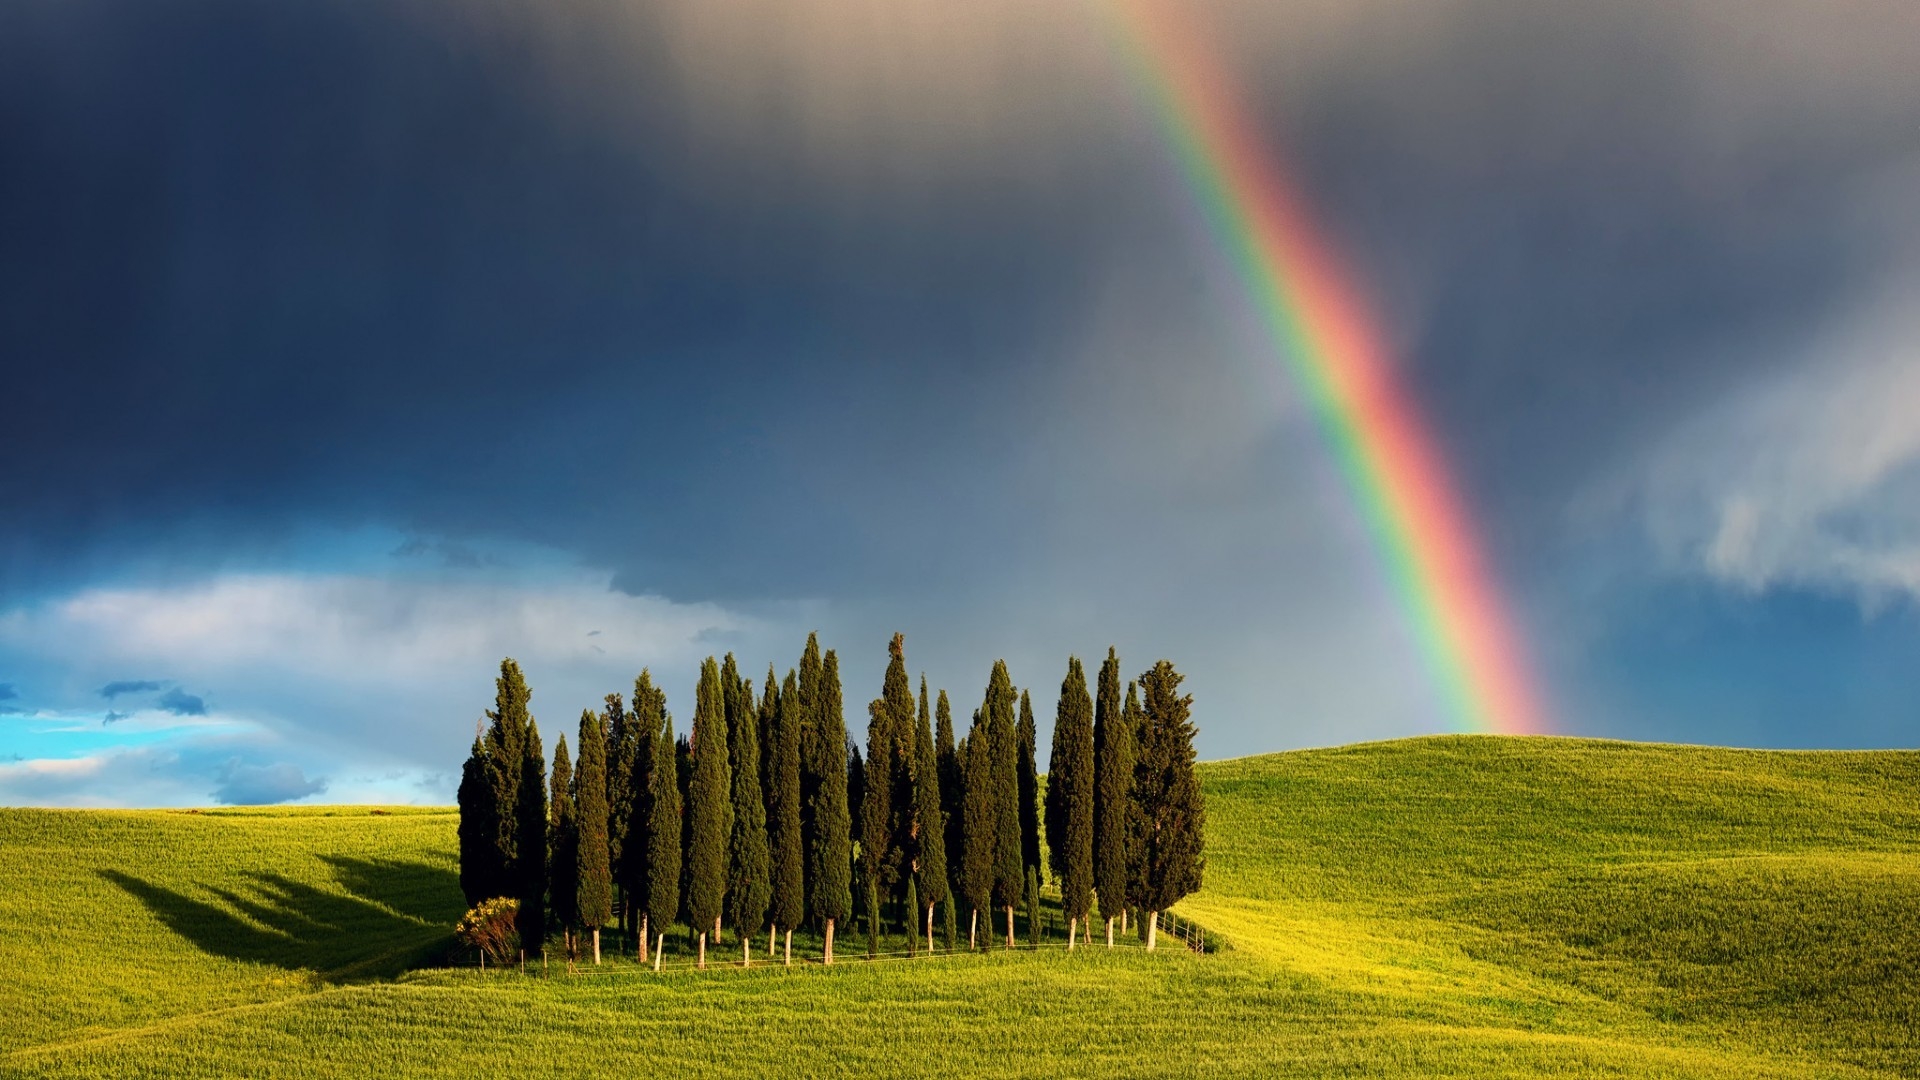 Rainbow in Tuscany for 1920 x 1080 HDTV 1080p resolution